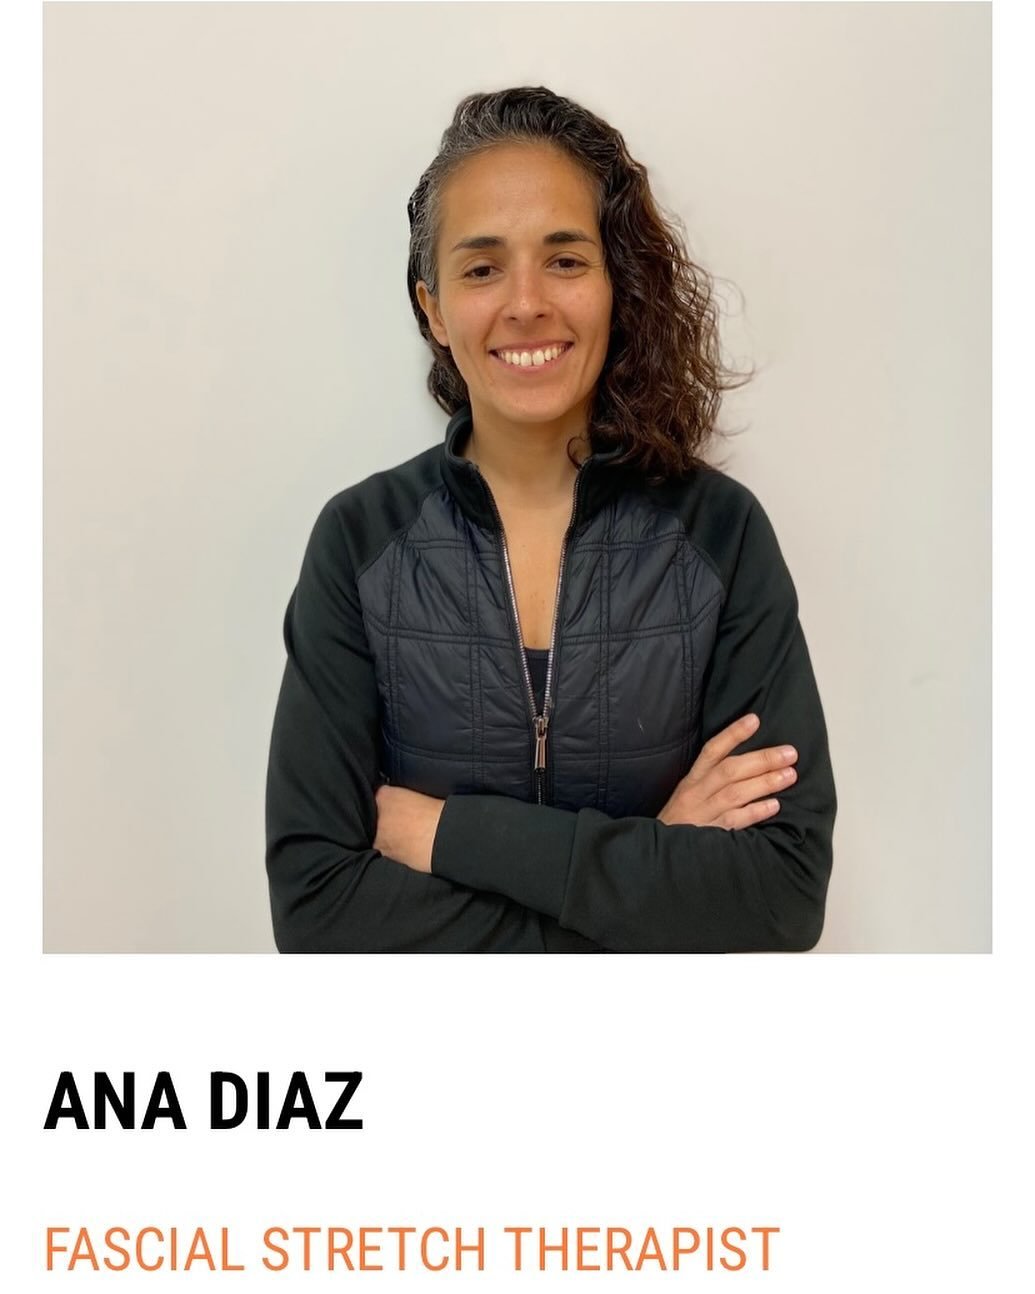 Join us in welcoming fascial stretch therapist and soon-to-be RMT Ana Diaz to the b-Stretched team! 

Ana is an experienced, caring and kind stretch therapist and fitness coach. Her calling is all about bringing back the holistic into healthcare.
Aft